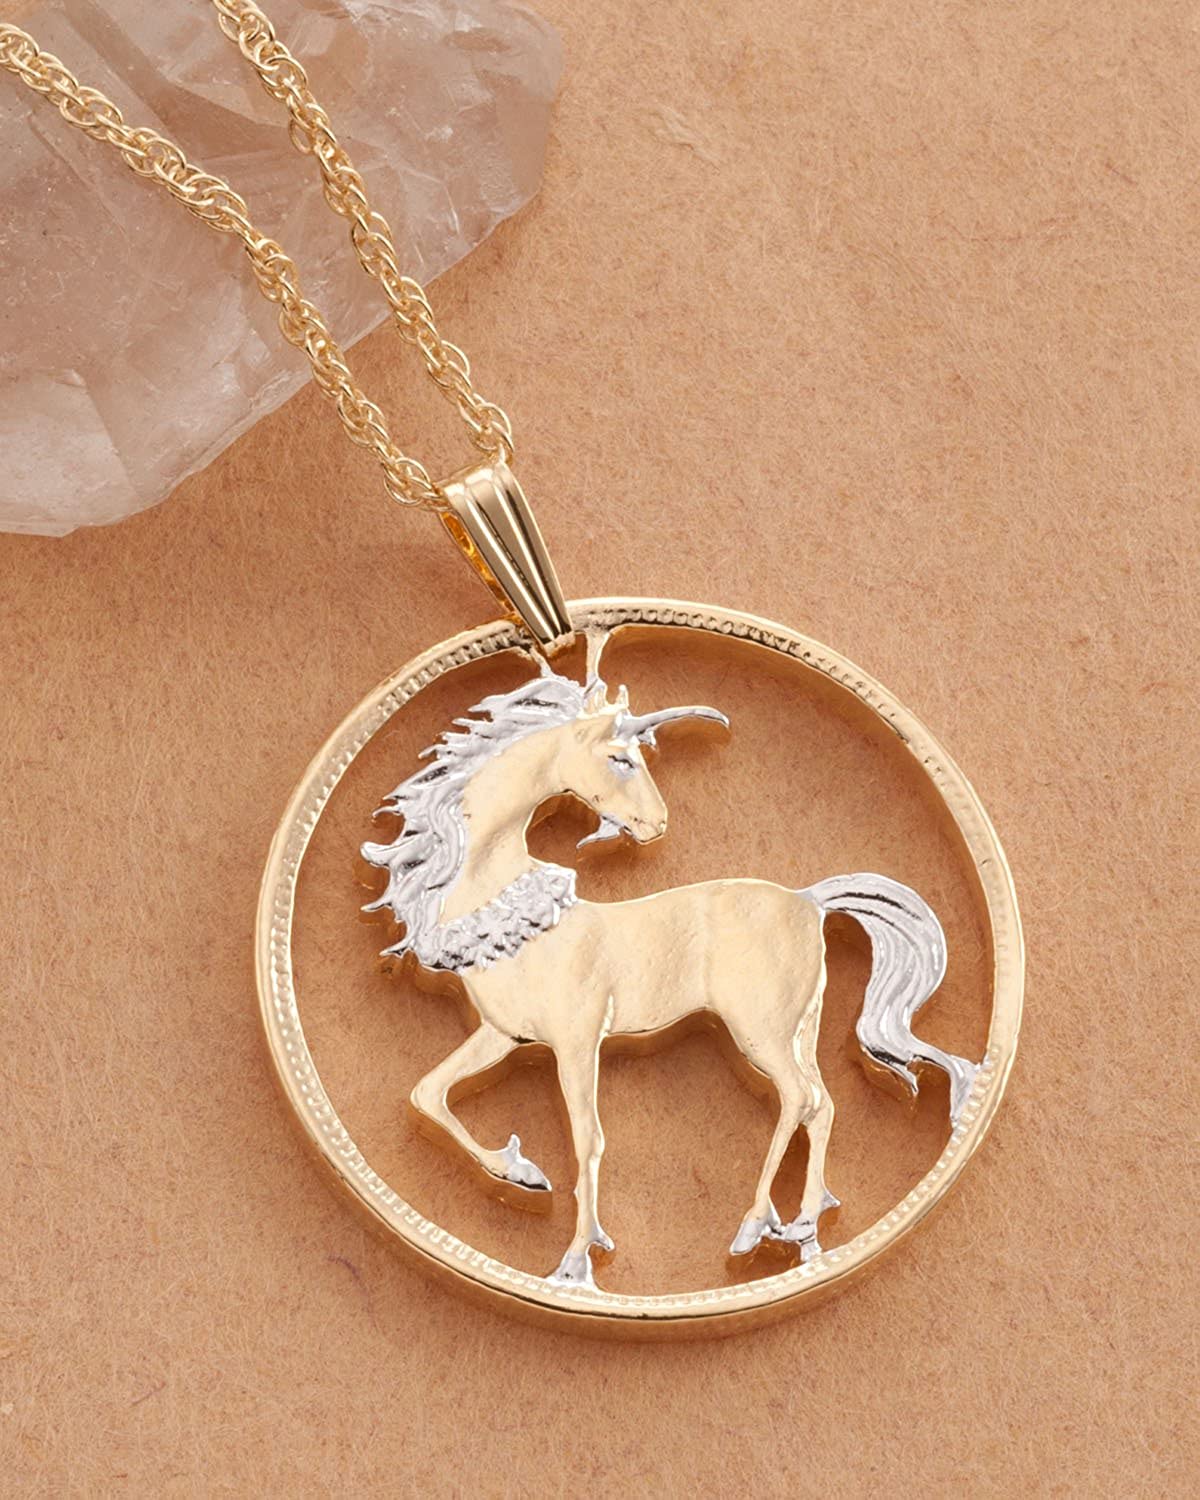 Unicorn Pendant and Necklace, Chinese Coin Hand Cut, 14 Karat Gold and Rhodium Plated, 1